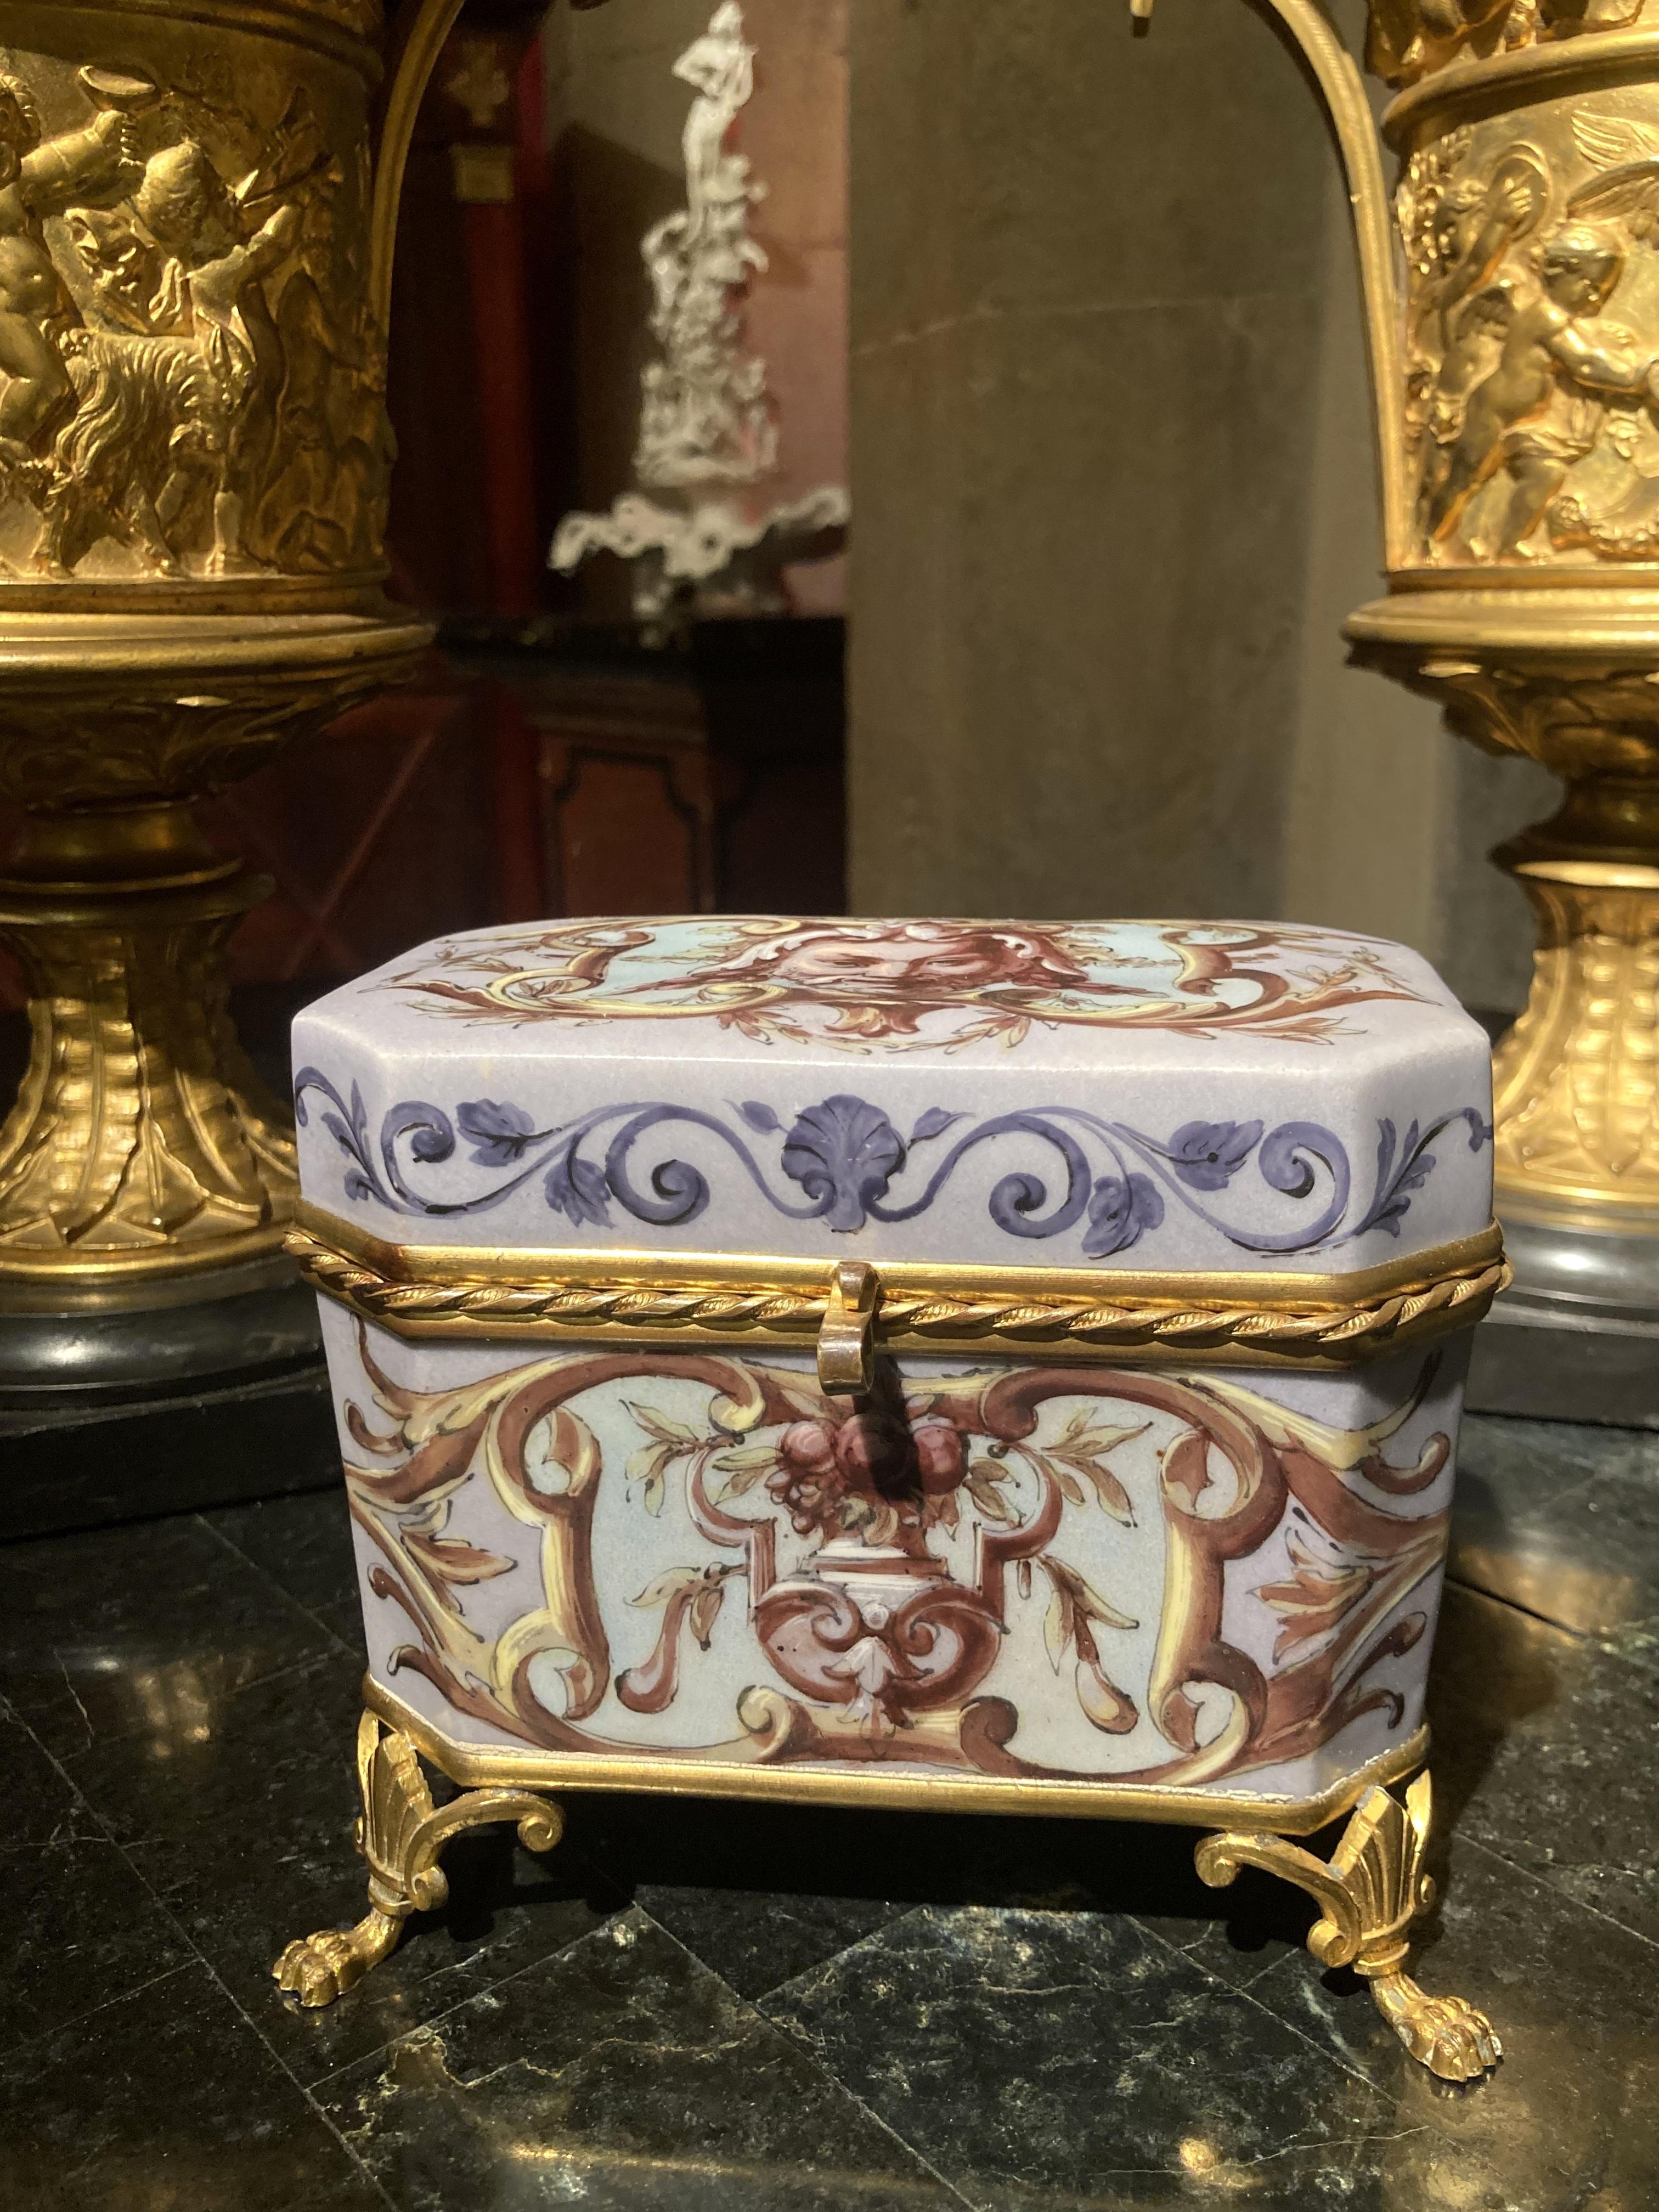 This French Empire 19th century rectangular porcelain dresser box or jewlery decorative casket has a wonderfully patinated powder blue/cerulean light blue background color and features grotesque masks, architectural vase, fruit, flowers and leafy